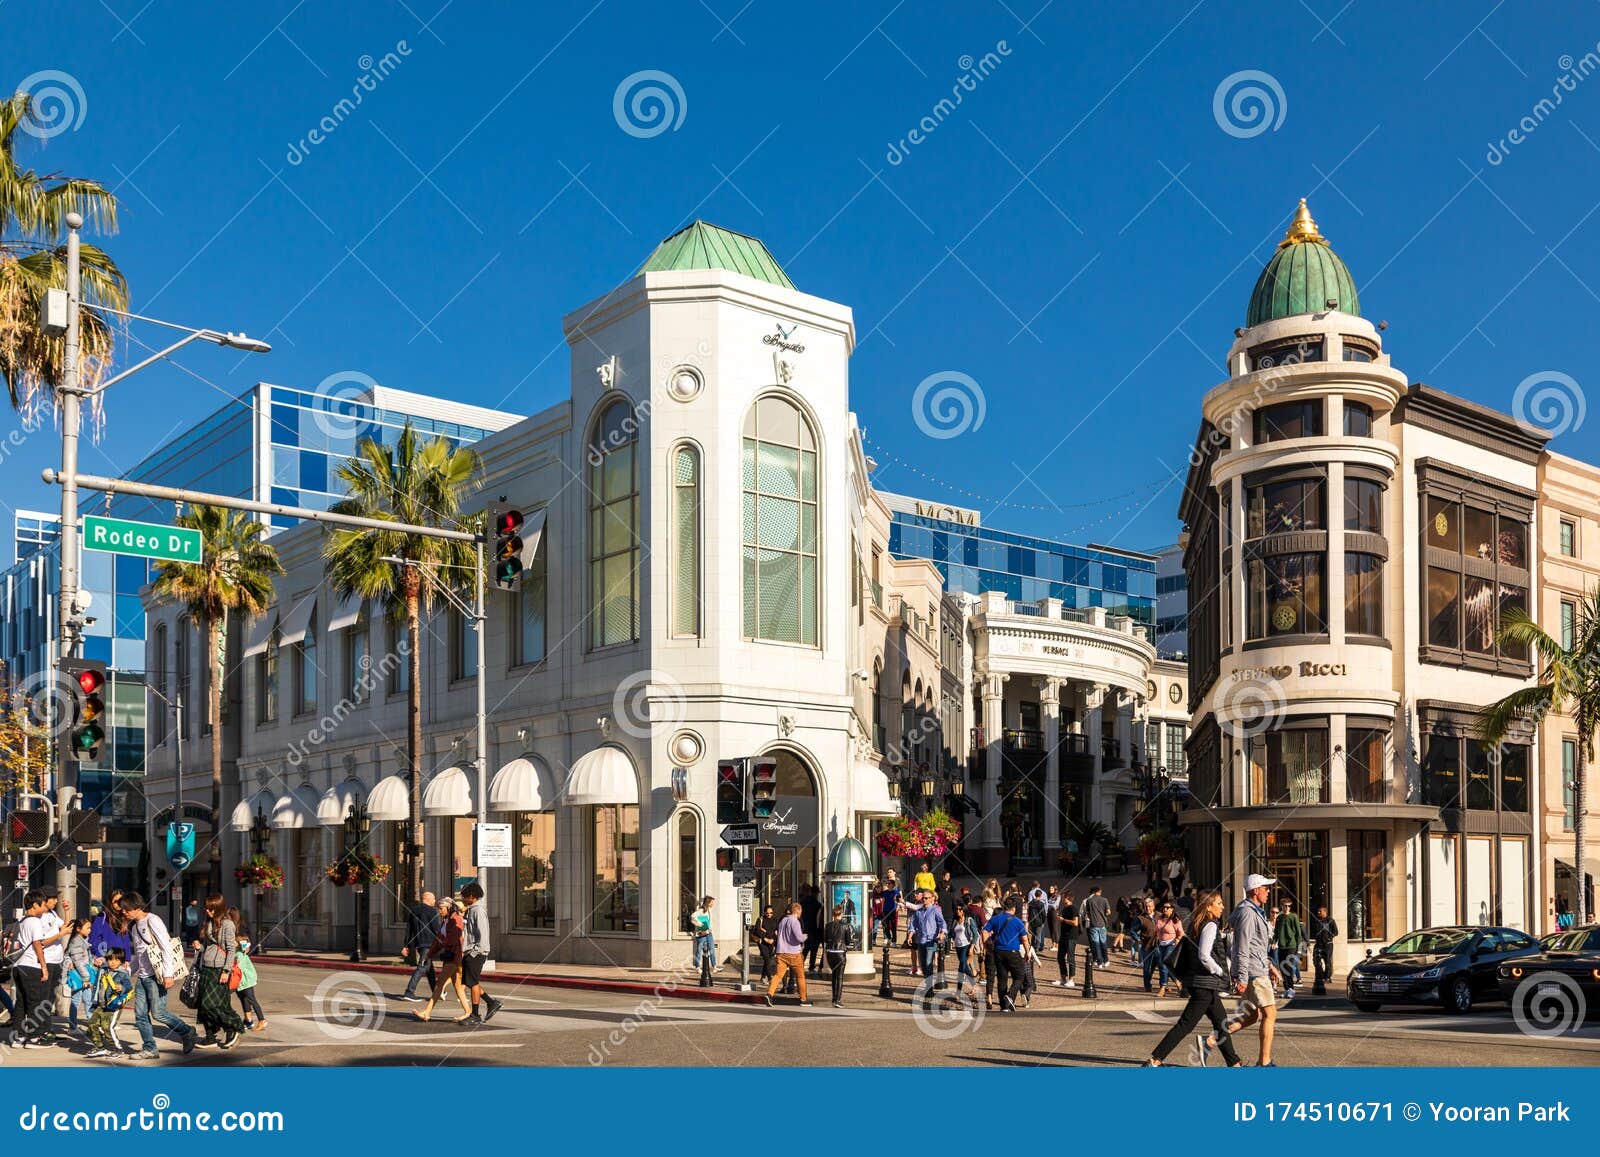 Rodeo Drive In Beverly Hills, Los Angeles, California Stock Photo